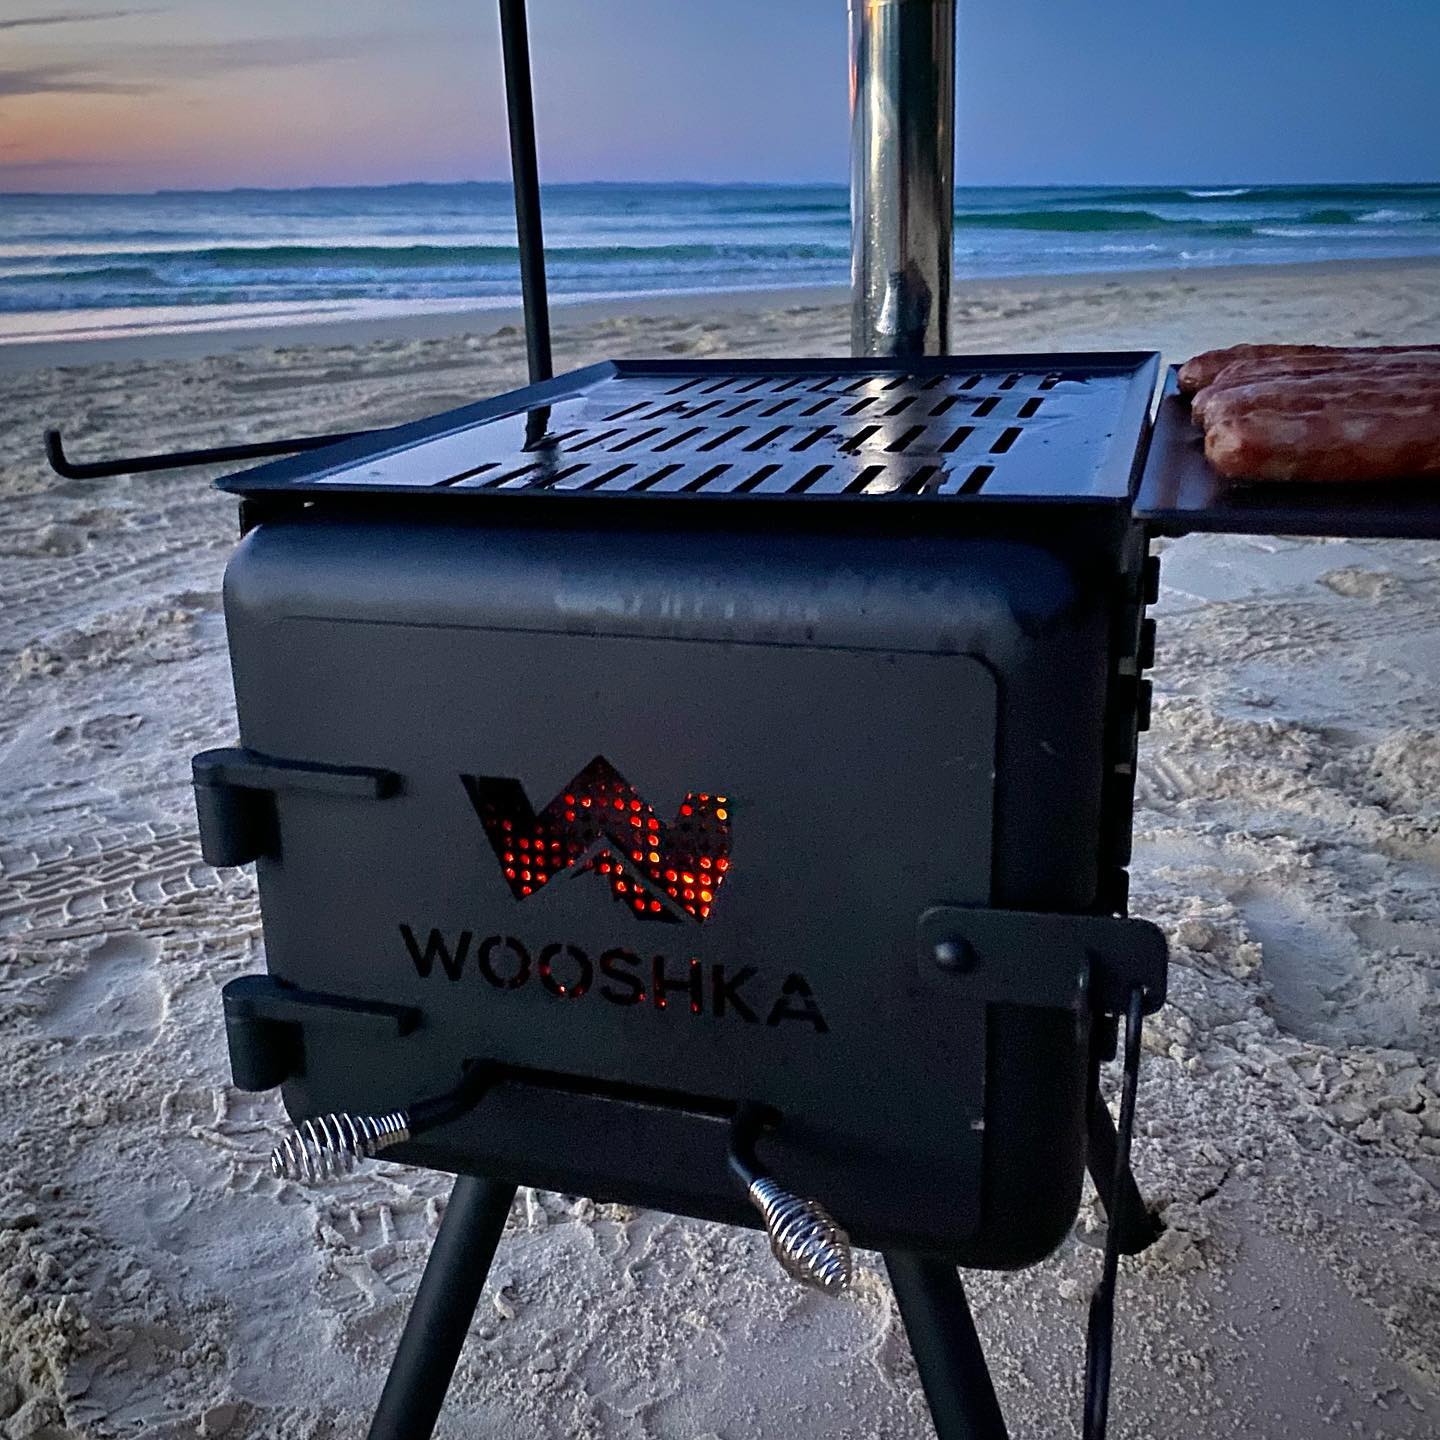 Snags and point breaks. Living the dream with my @wooshkalife firepit/ BBQ/ smoker…

Now that Cooloola has a permanent fire prohibition, these things are the only way to cook over an open flame.